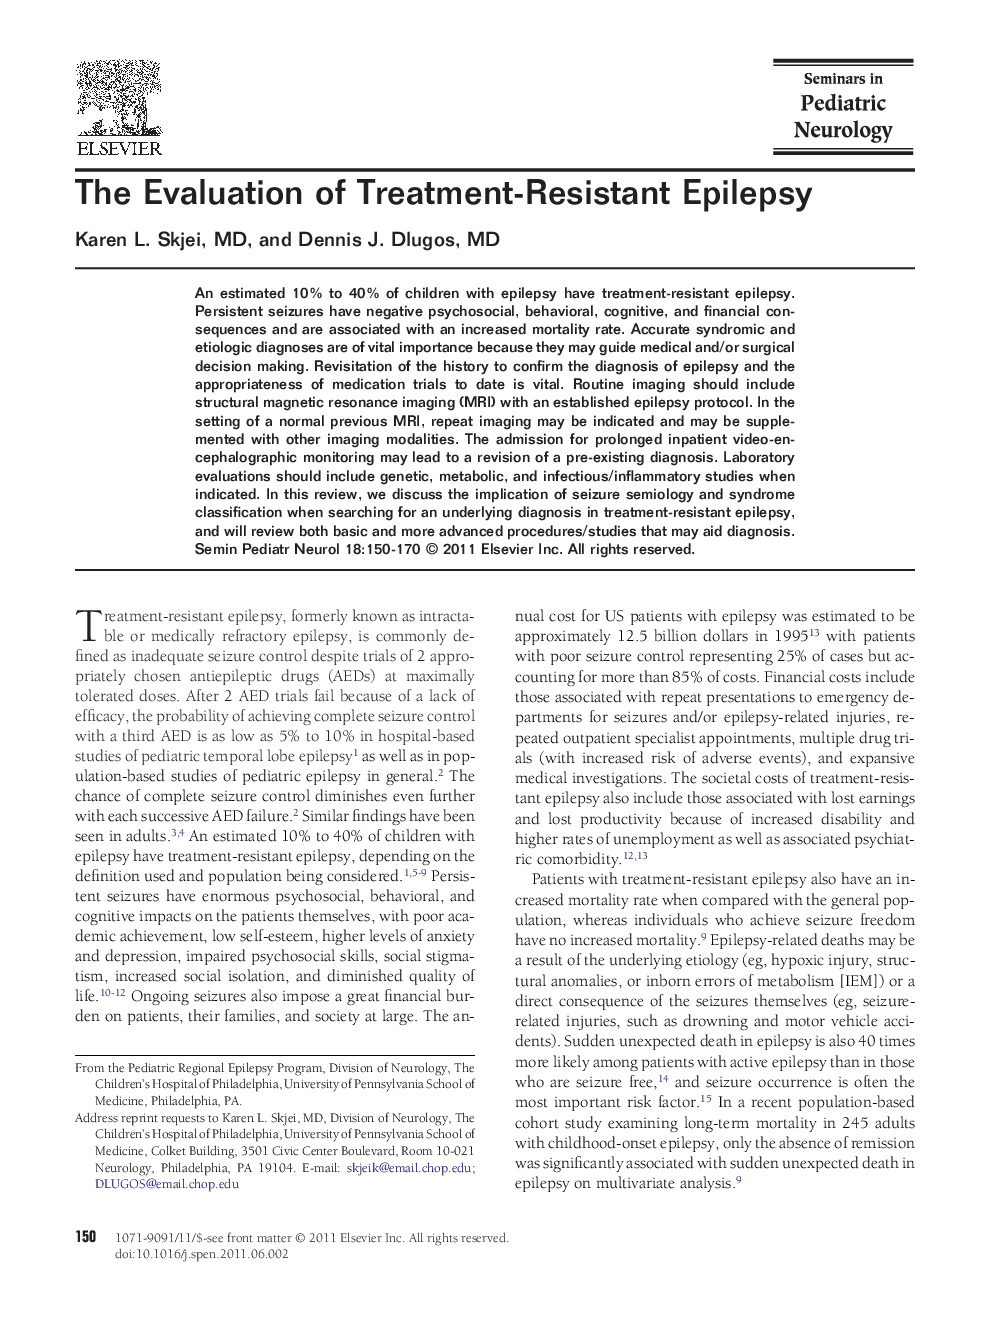 The Evaluation of Treatment-Resistant Epilepsy